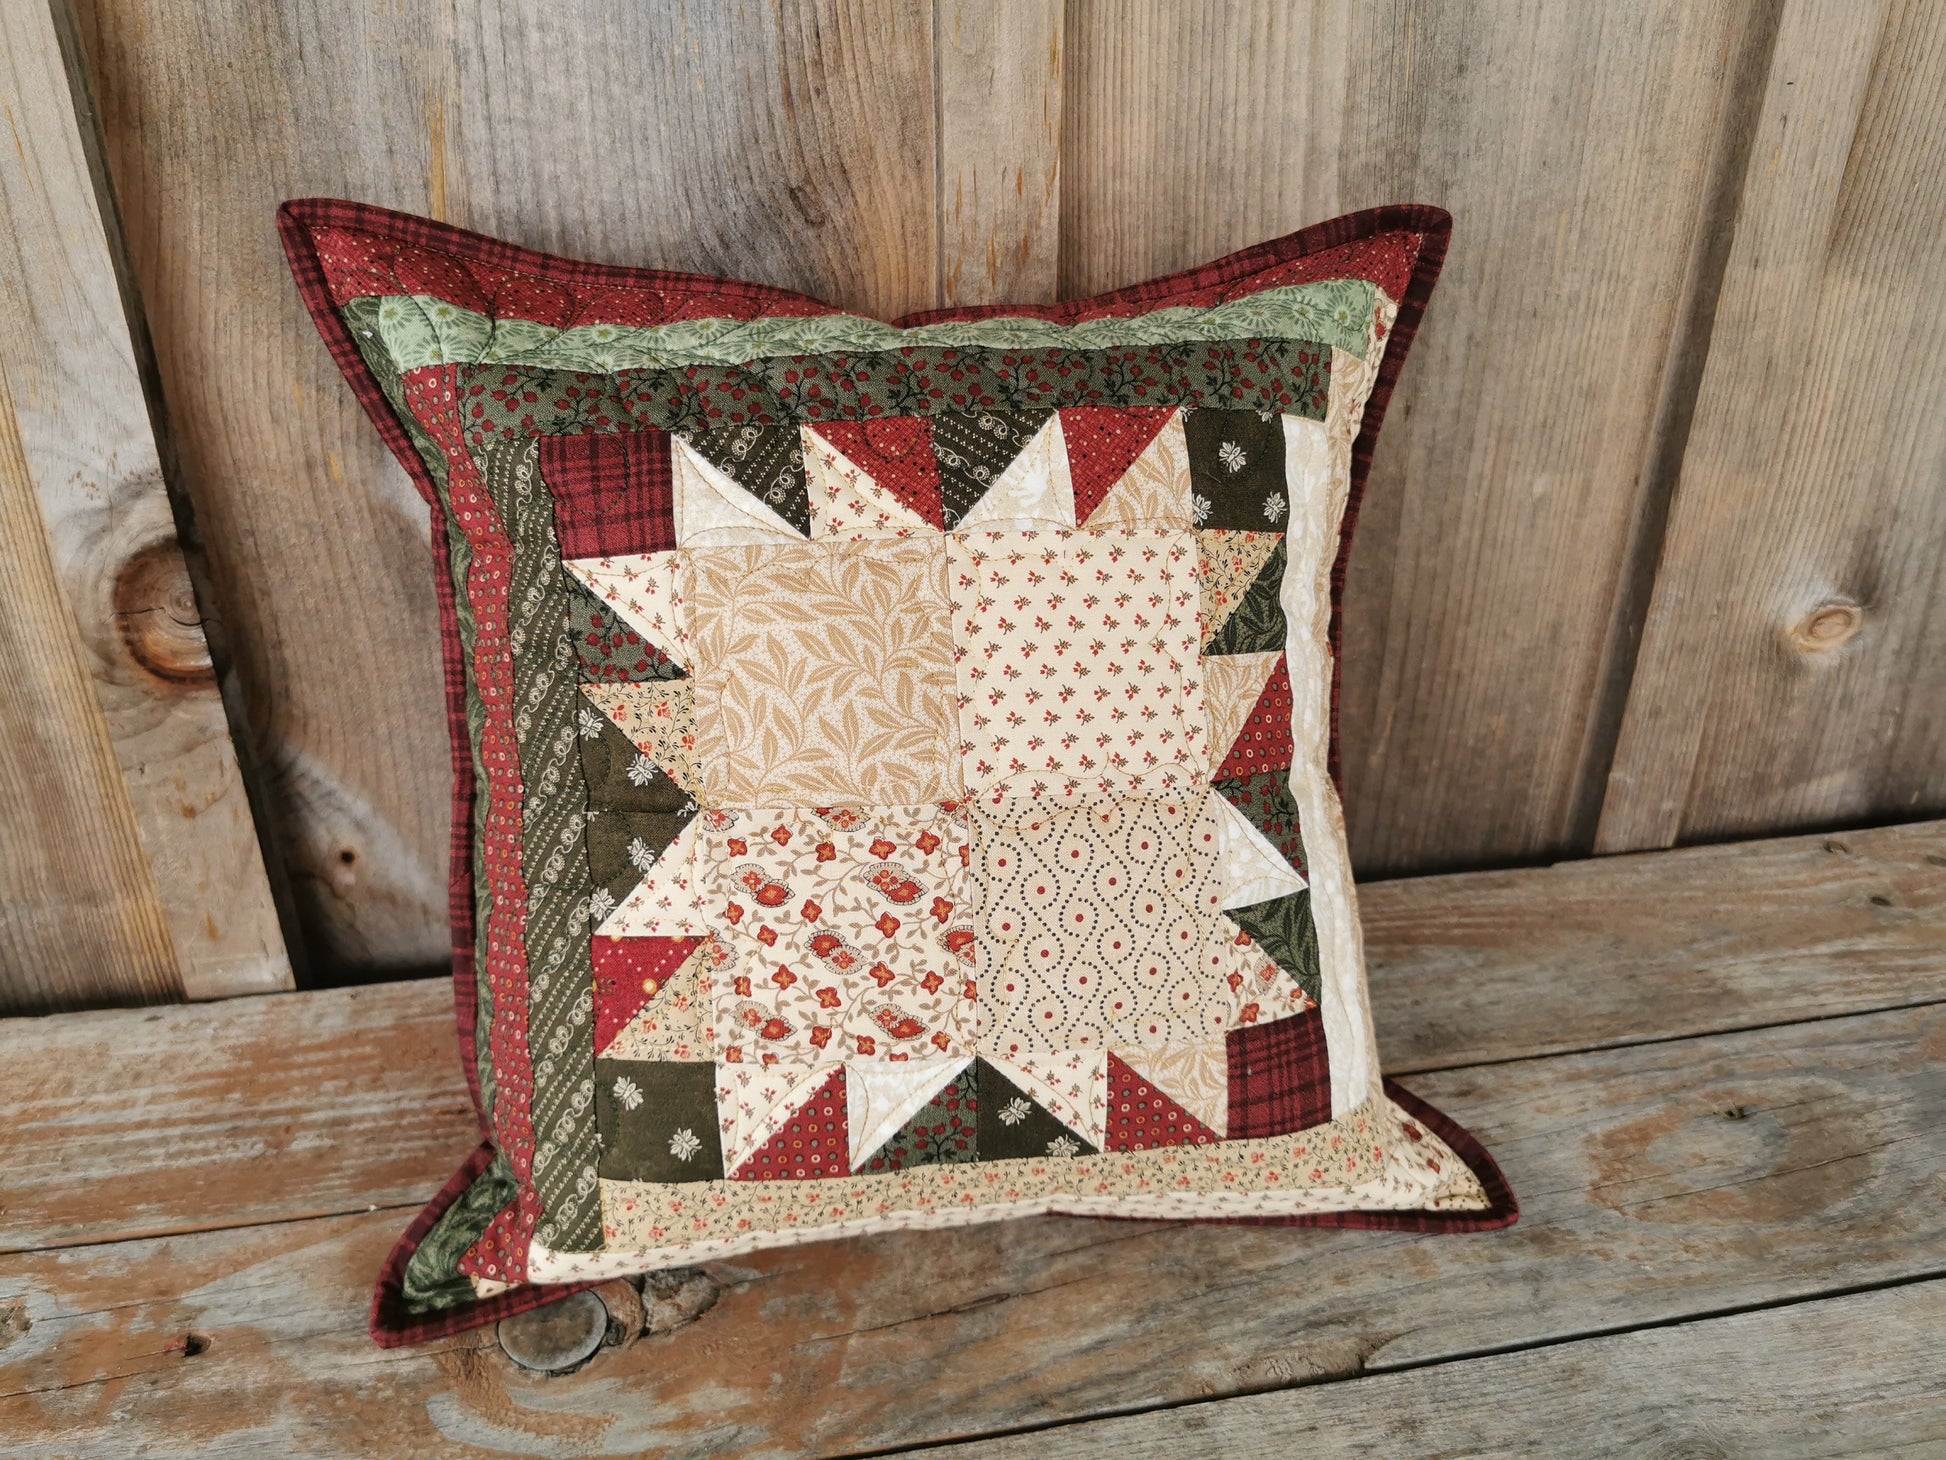 This scrappy patchwork pillow is done in the bear paw pattern. A traditional Christmas colours of red, green and cream make this suitable for holiday decor.  